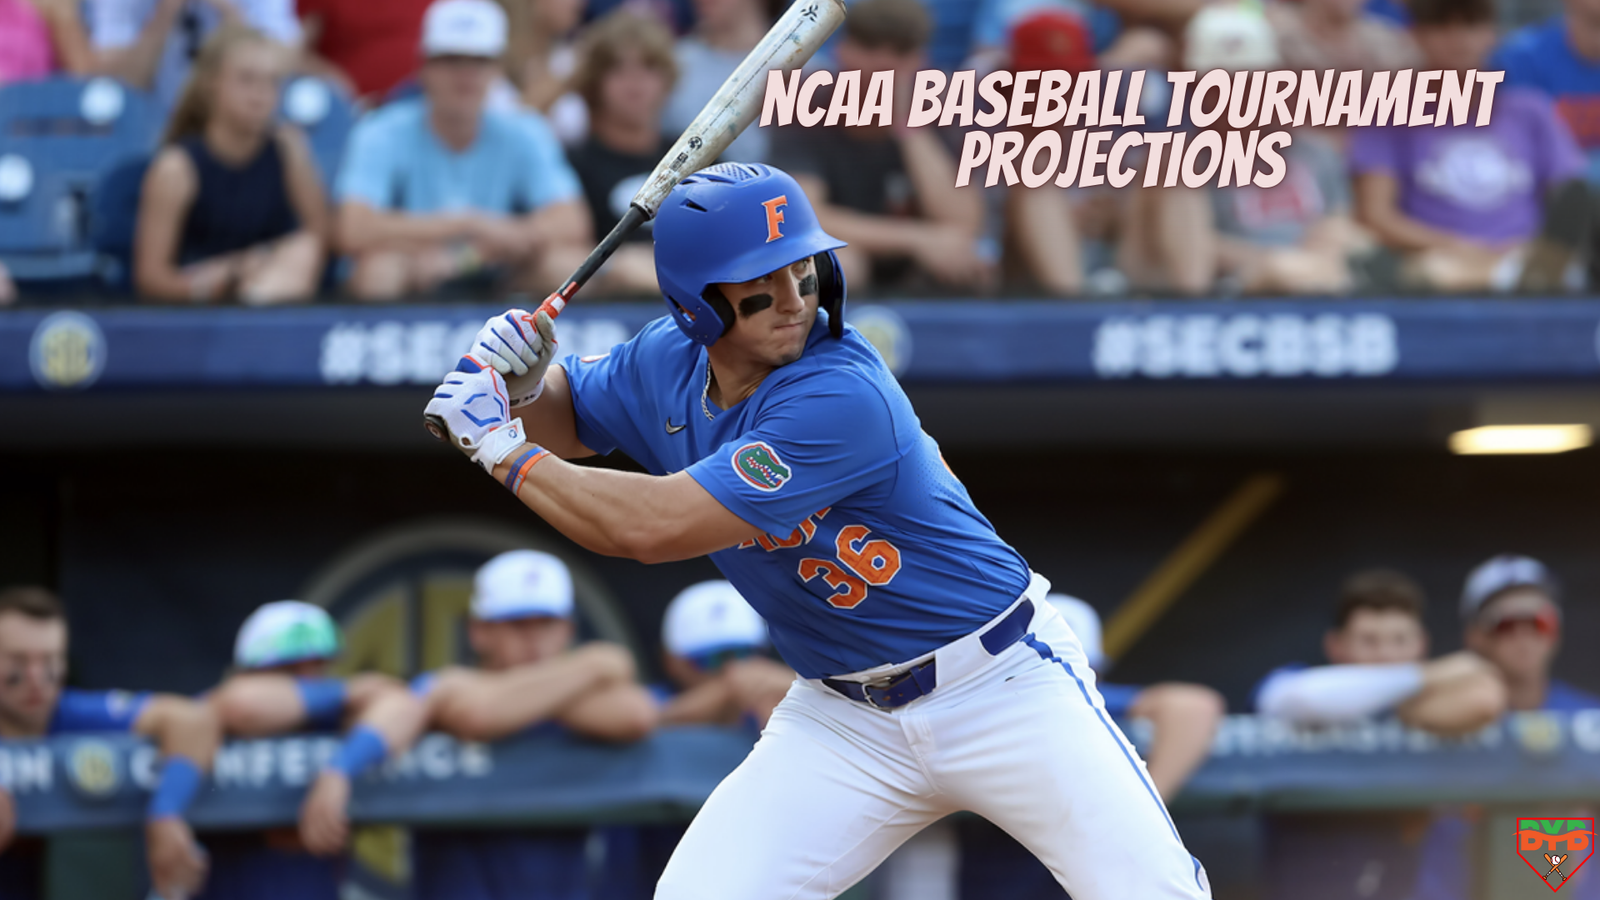 Breaking Down the NCAA Baseball Tournament Projections Who’s In and